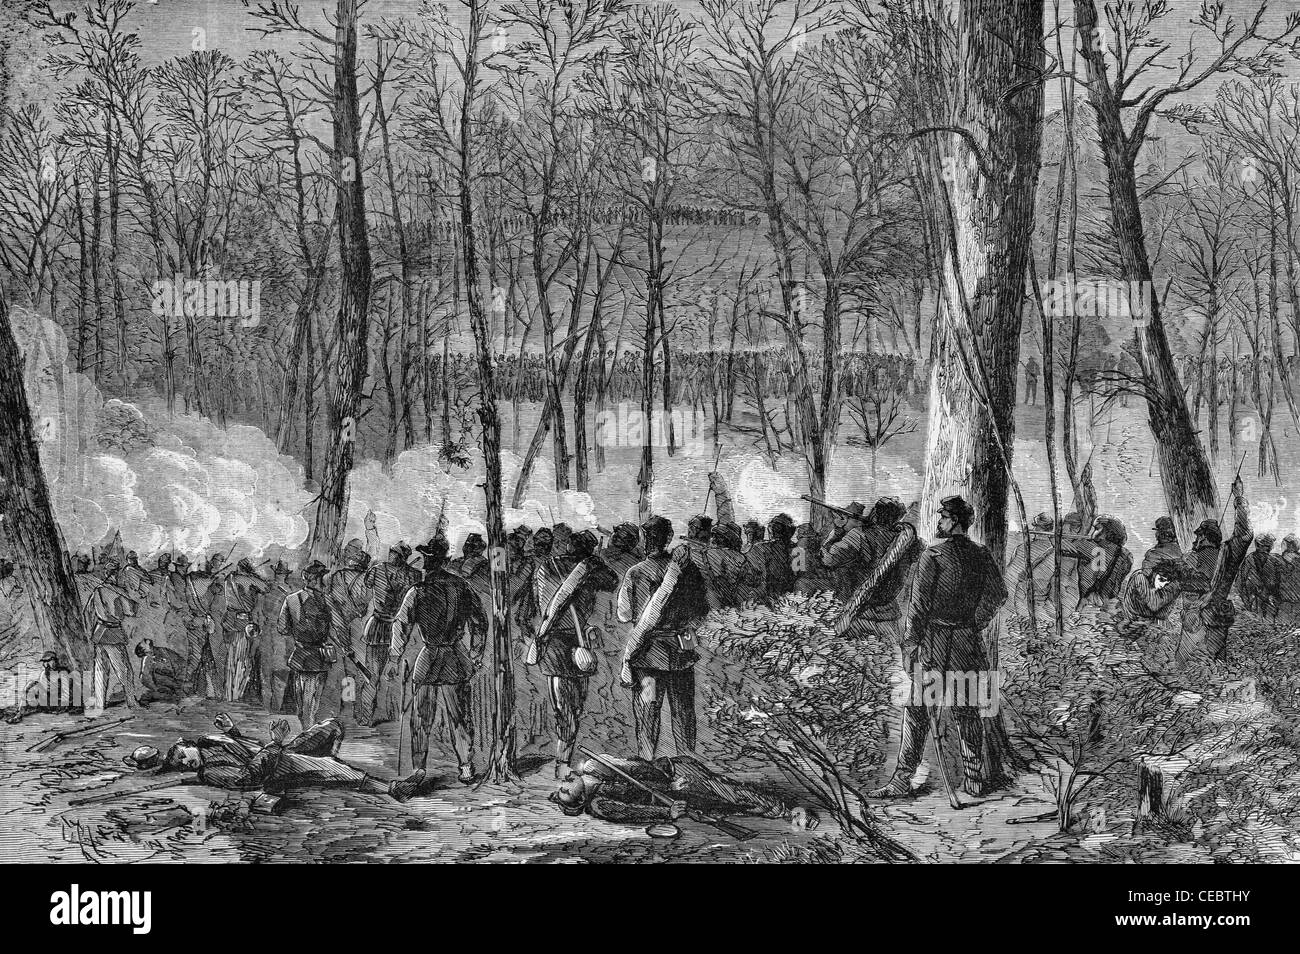 General Wadsworths division in action in the Wilderness, near the spot where the General was killed during USA Civil War, 1864 Stock Photo